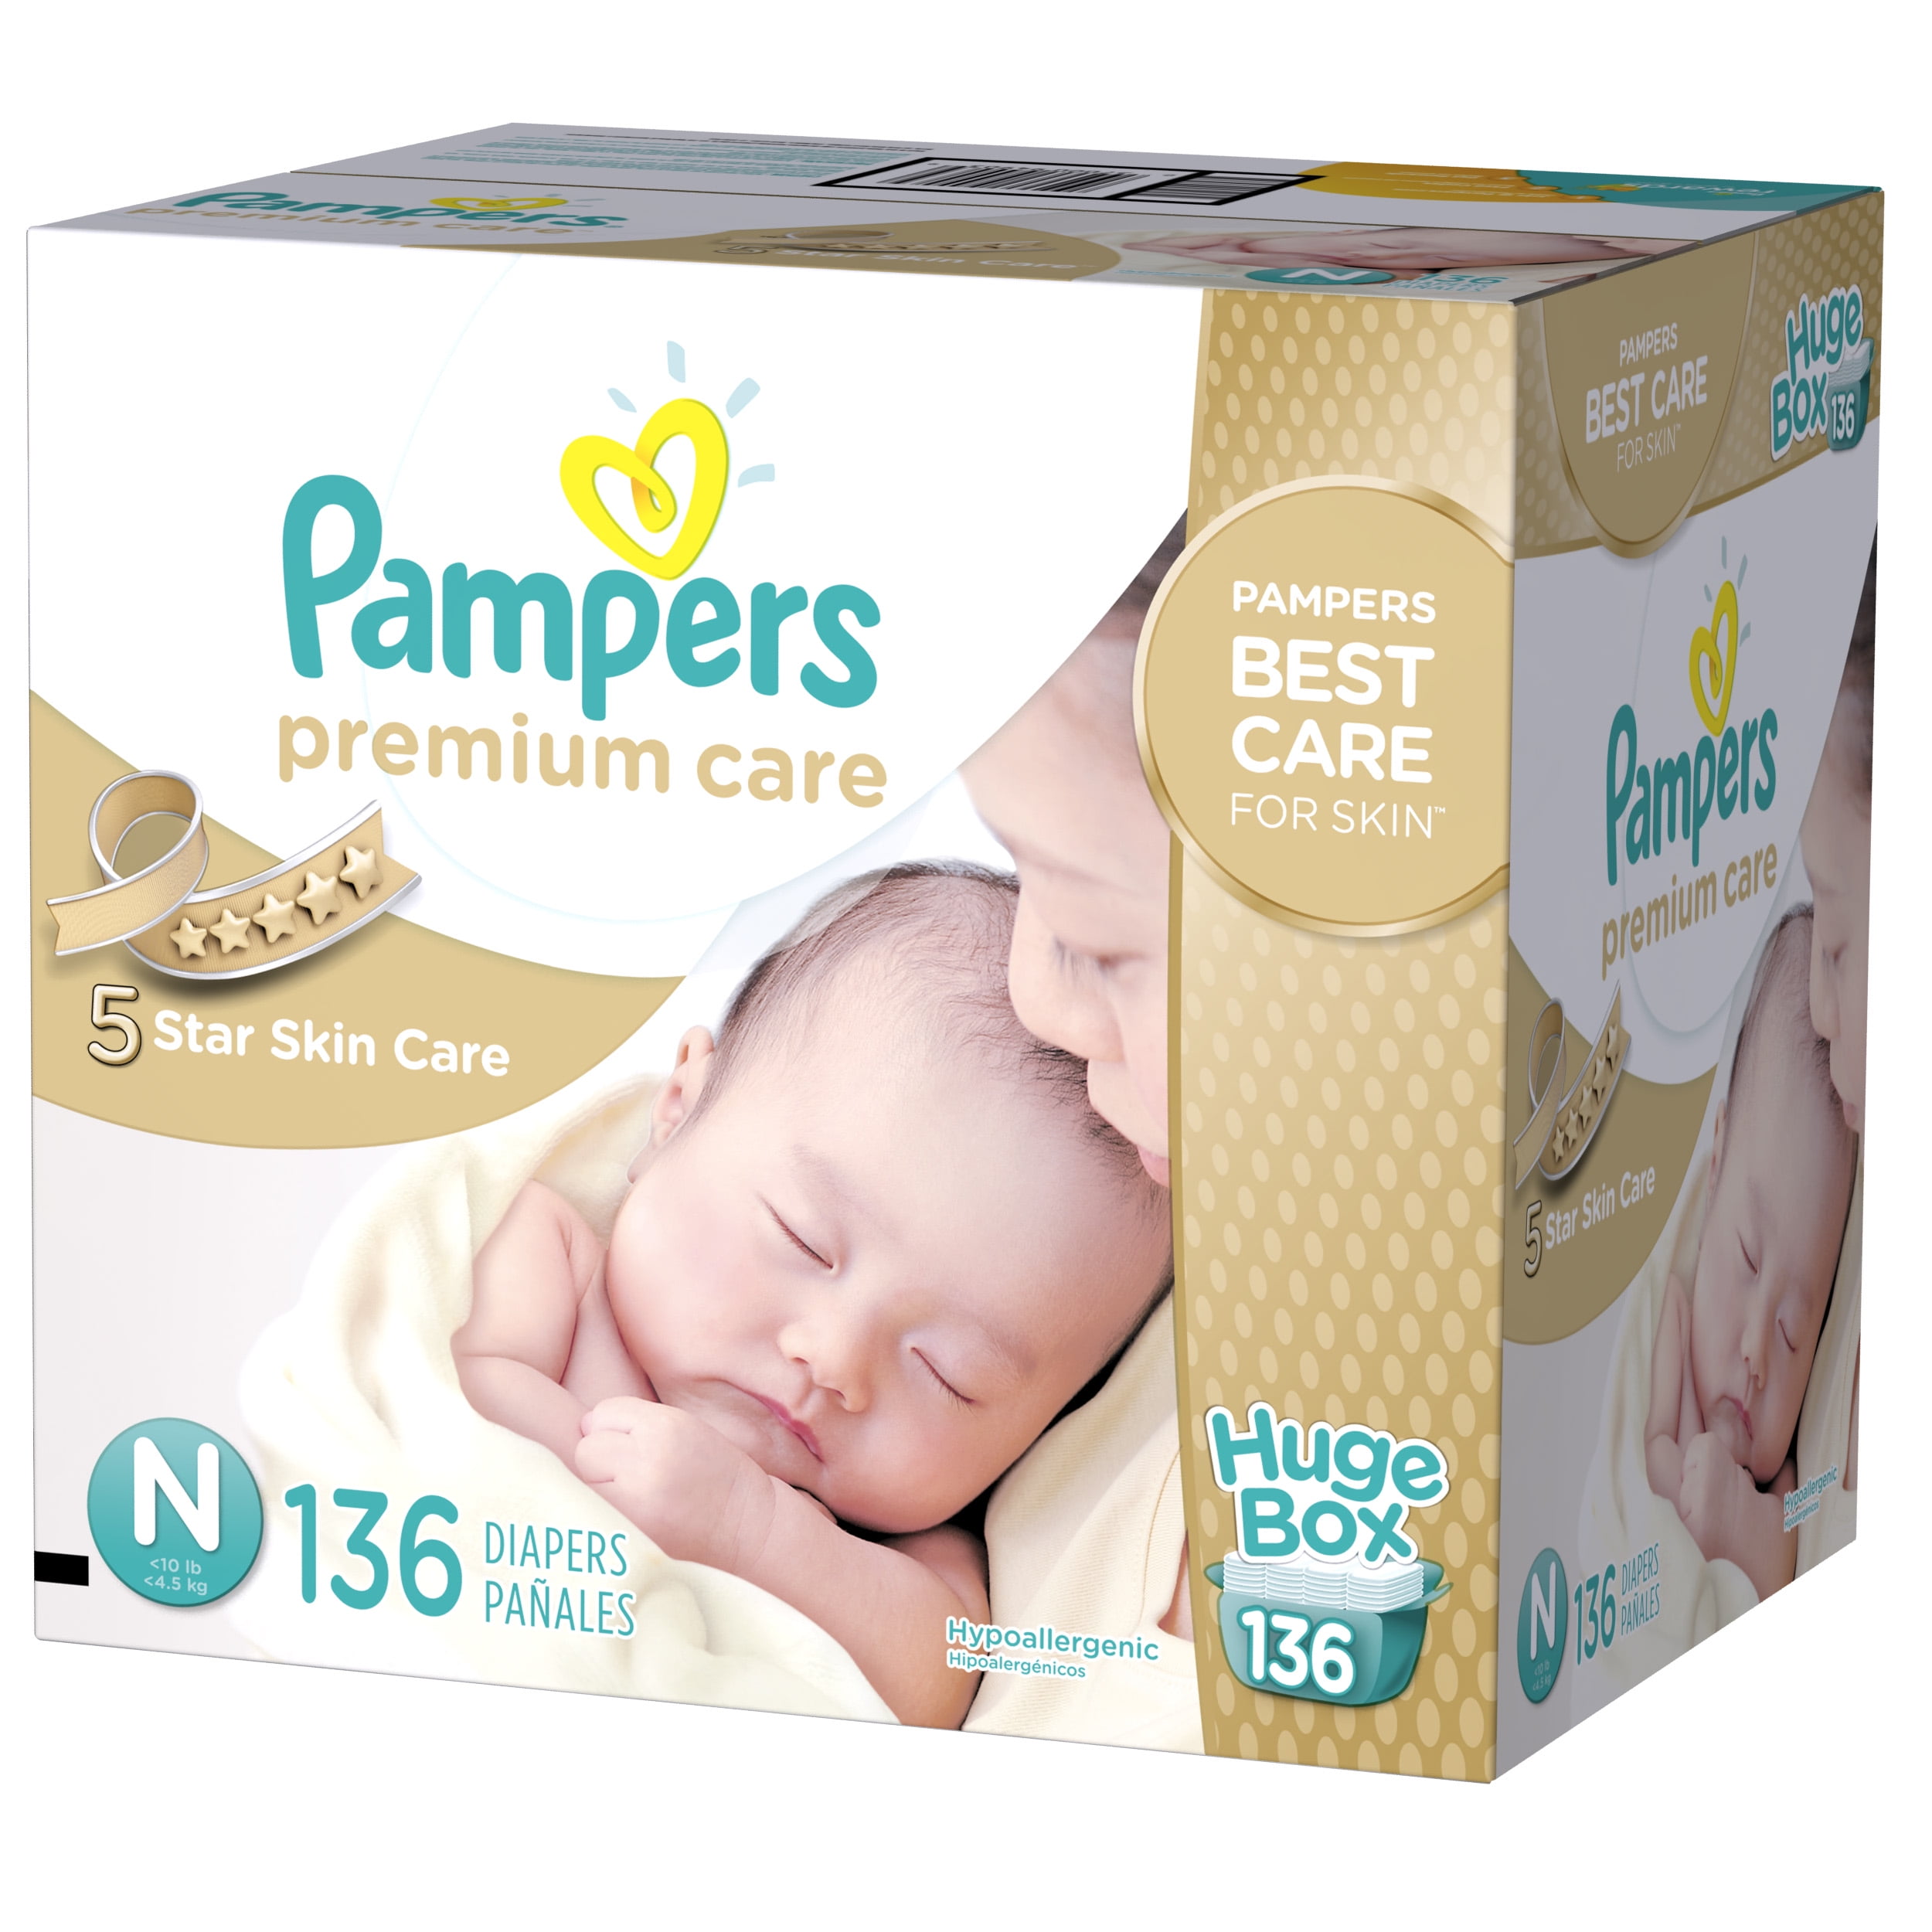 Babies Love Soft - Our Softest Pampers Premium Care Pants - YouTube